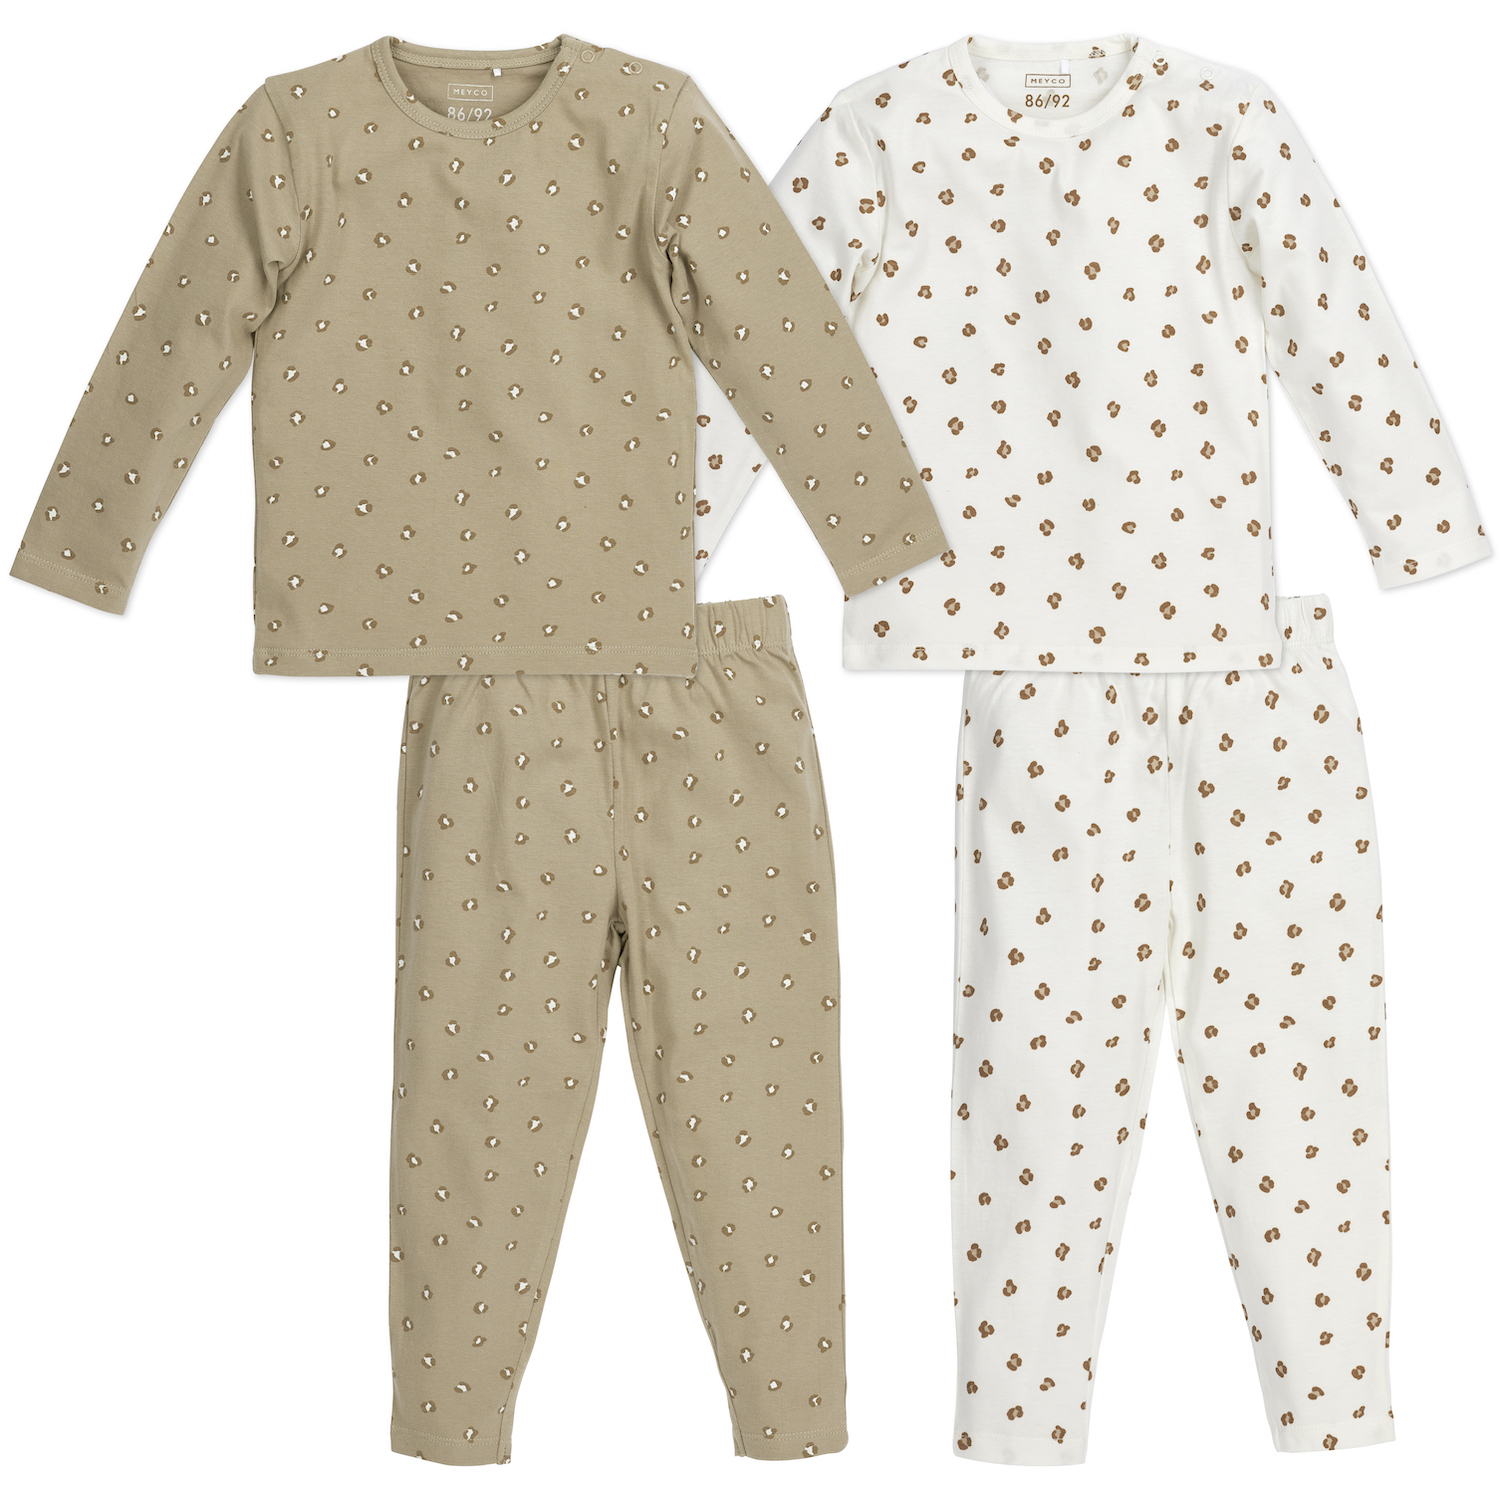 Pajamas 2-pack Mini Panther - Offwhite/Sand - Size 86/92